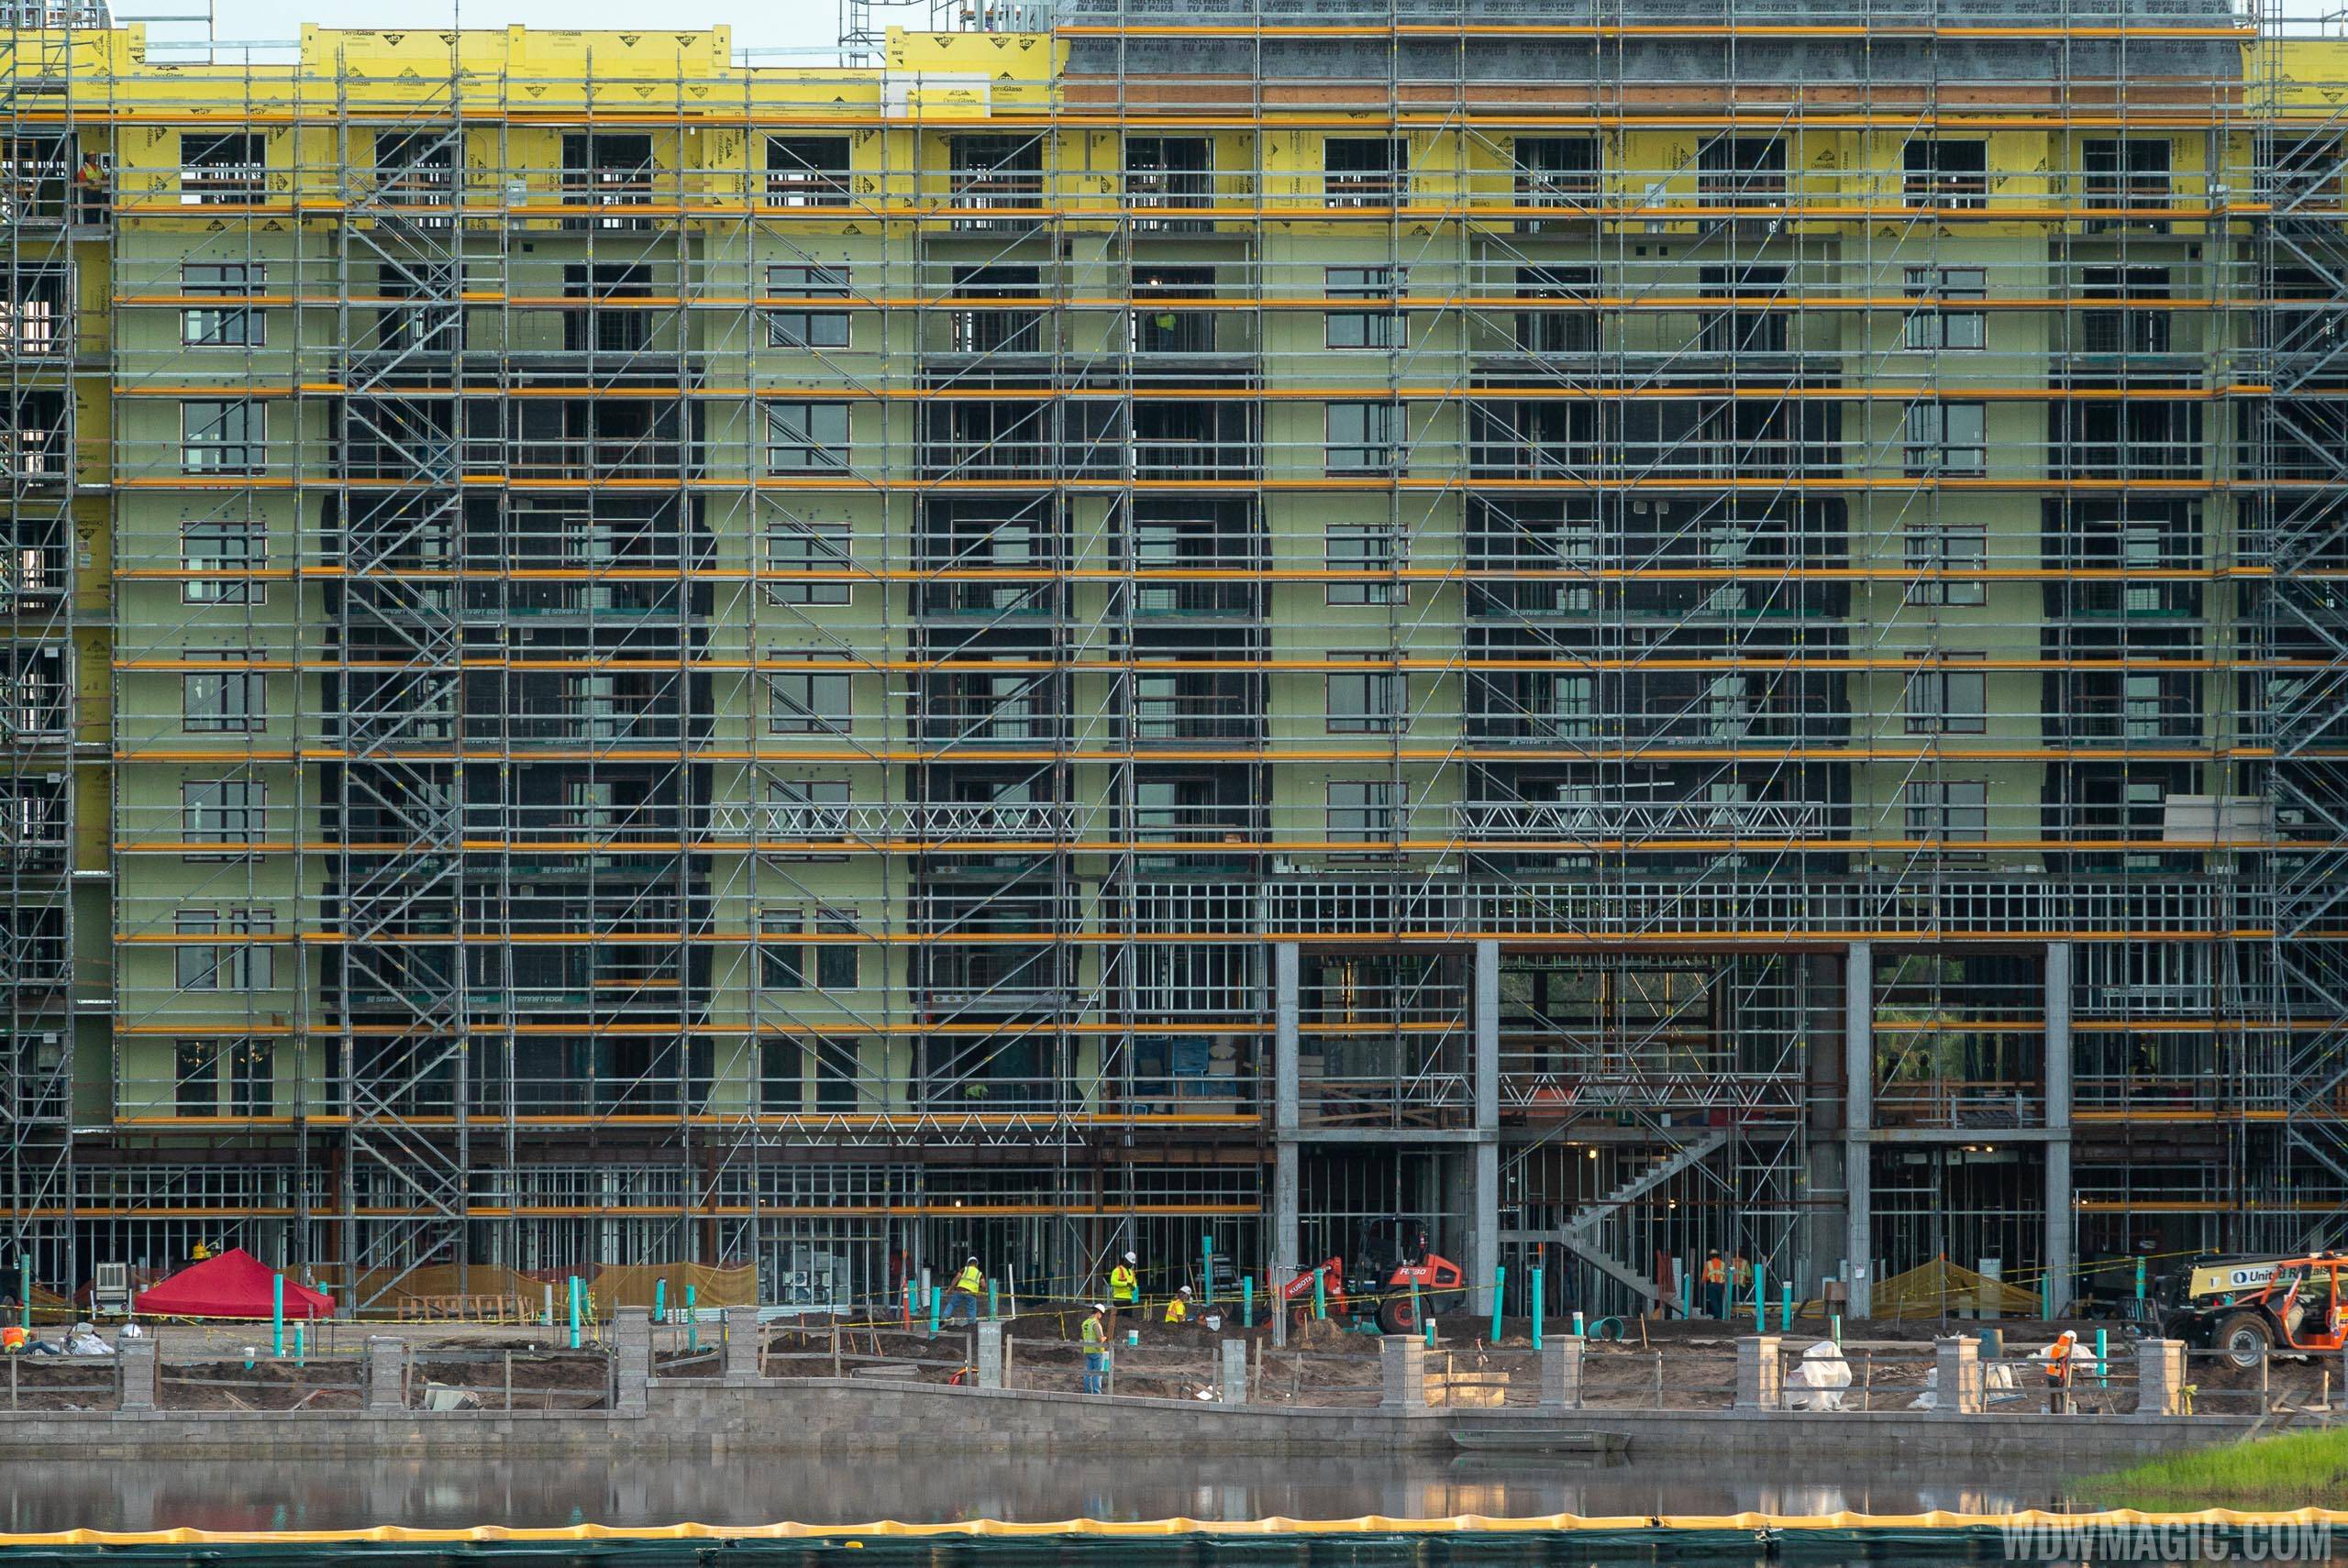 Disney Riviera construction from the ground - October 2018